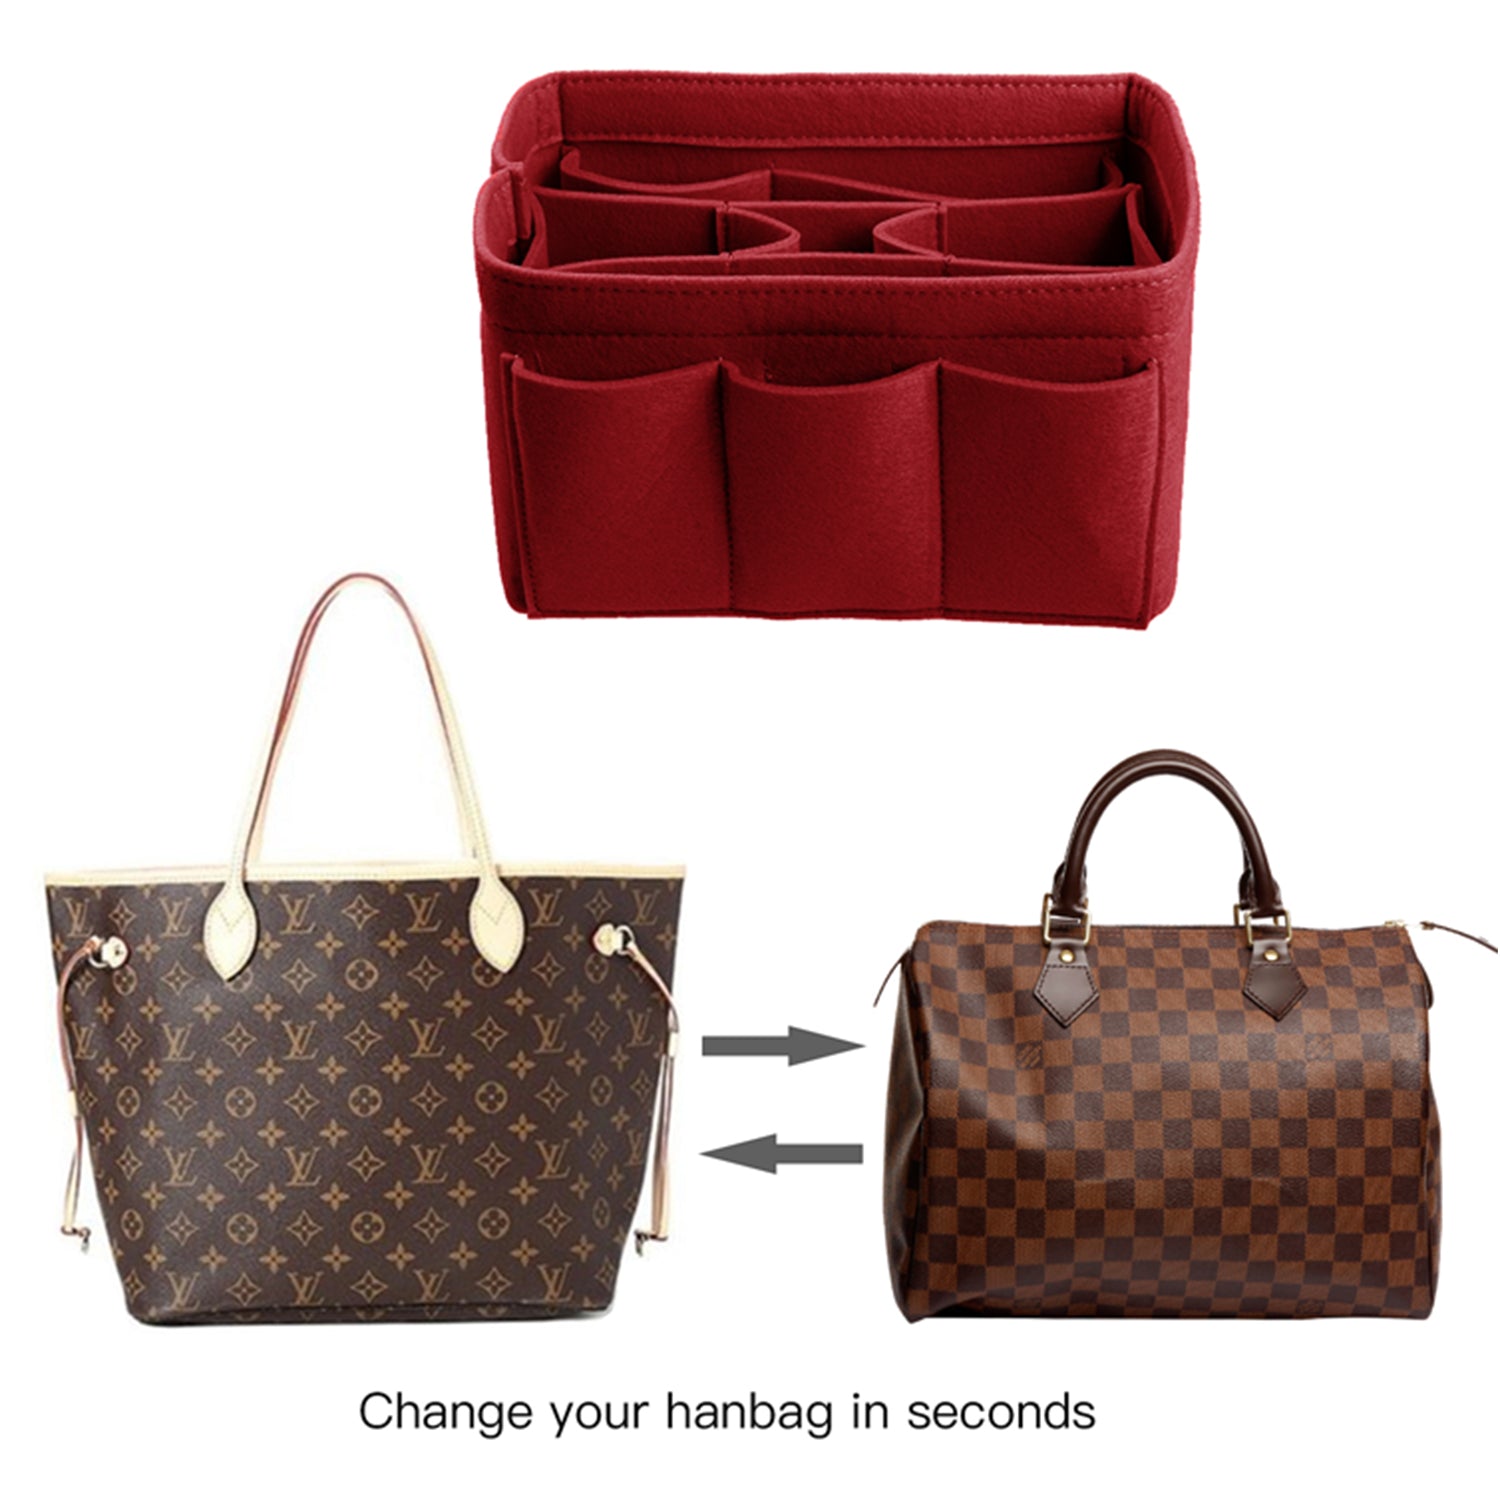 Upgraded Version Purse Bag Organizer with Sewn Bottom Insert for LV Speedy and Neverfull